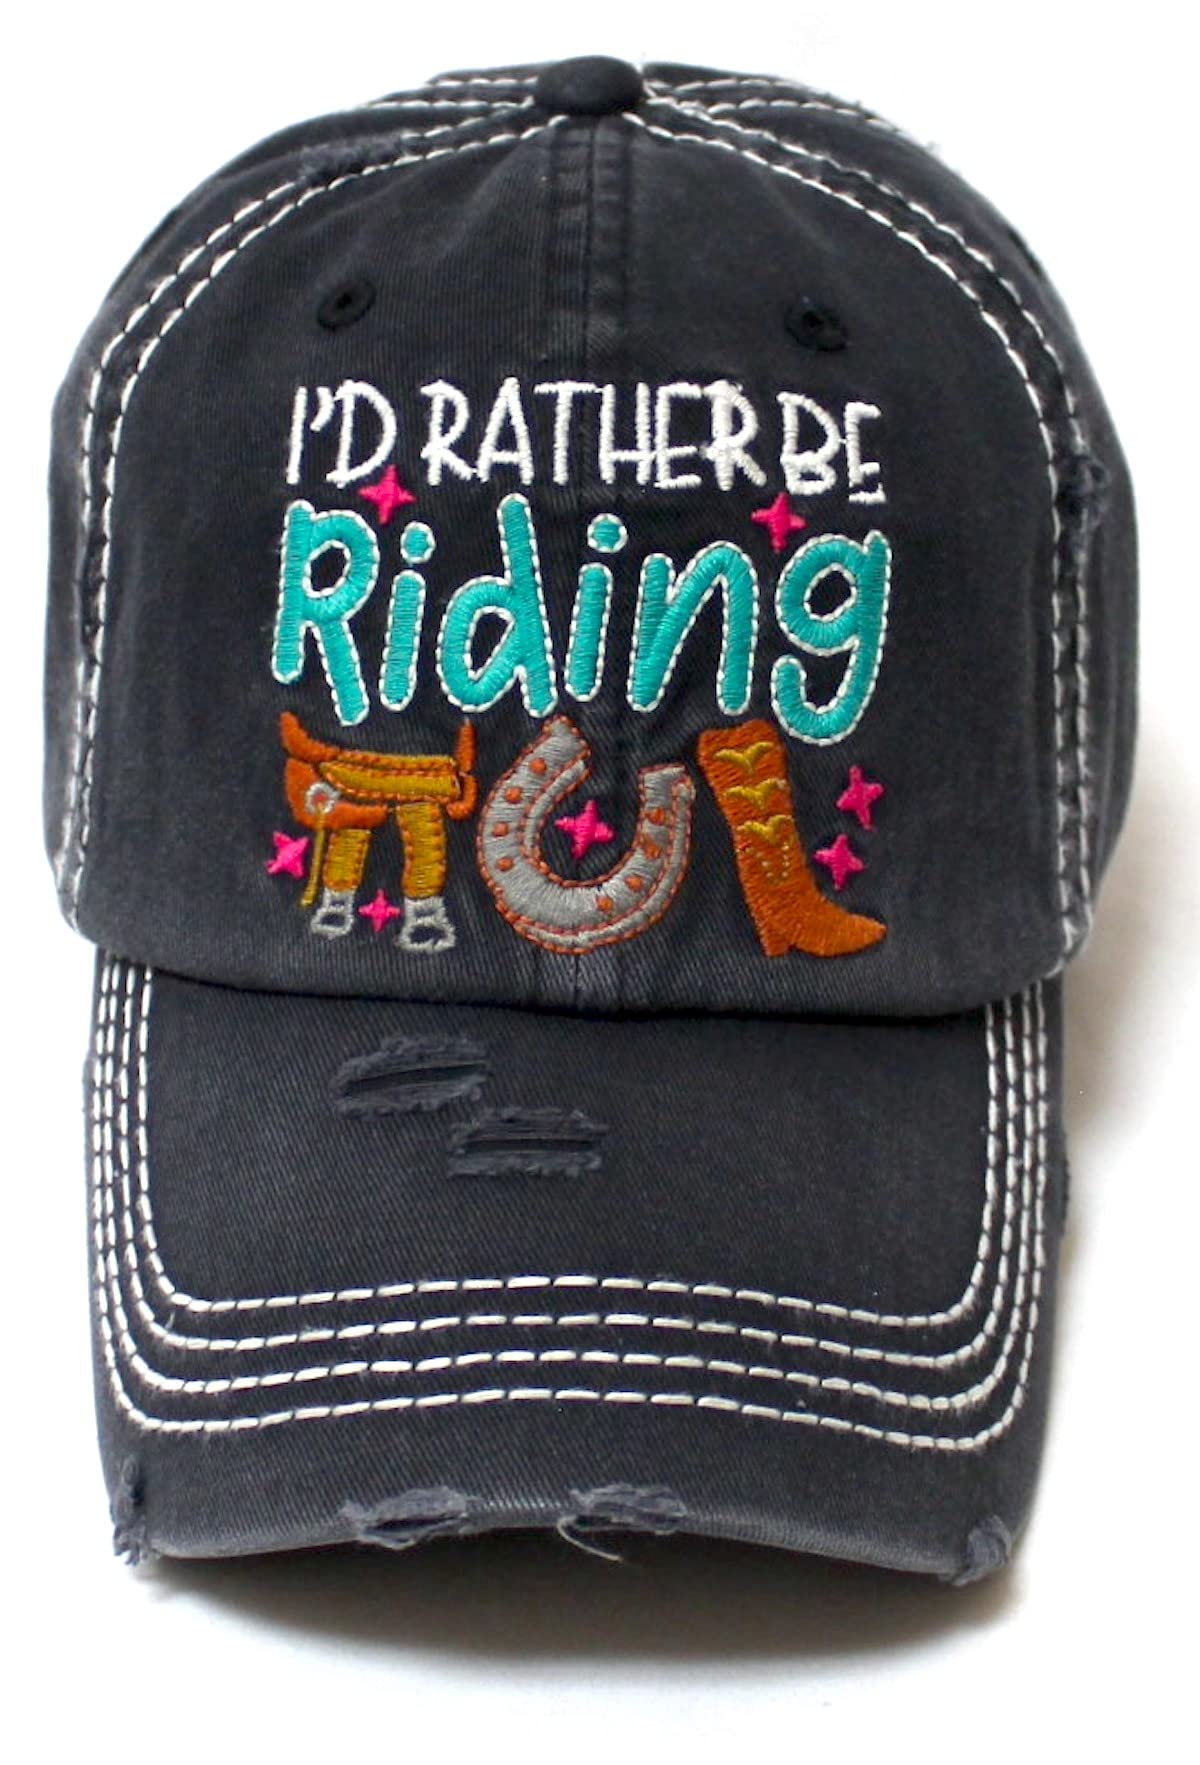 CAPS 'N VINTAGE Women's Hat I'd Rather be Riding Western Country Themed Patch Embroidery Distressed Cap, Black